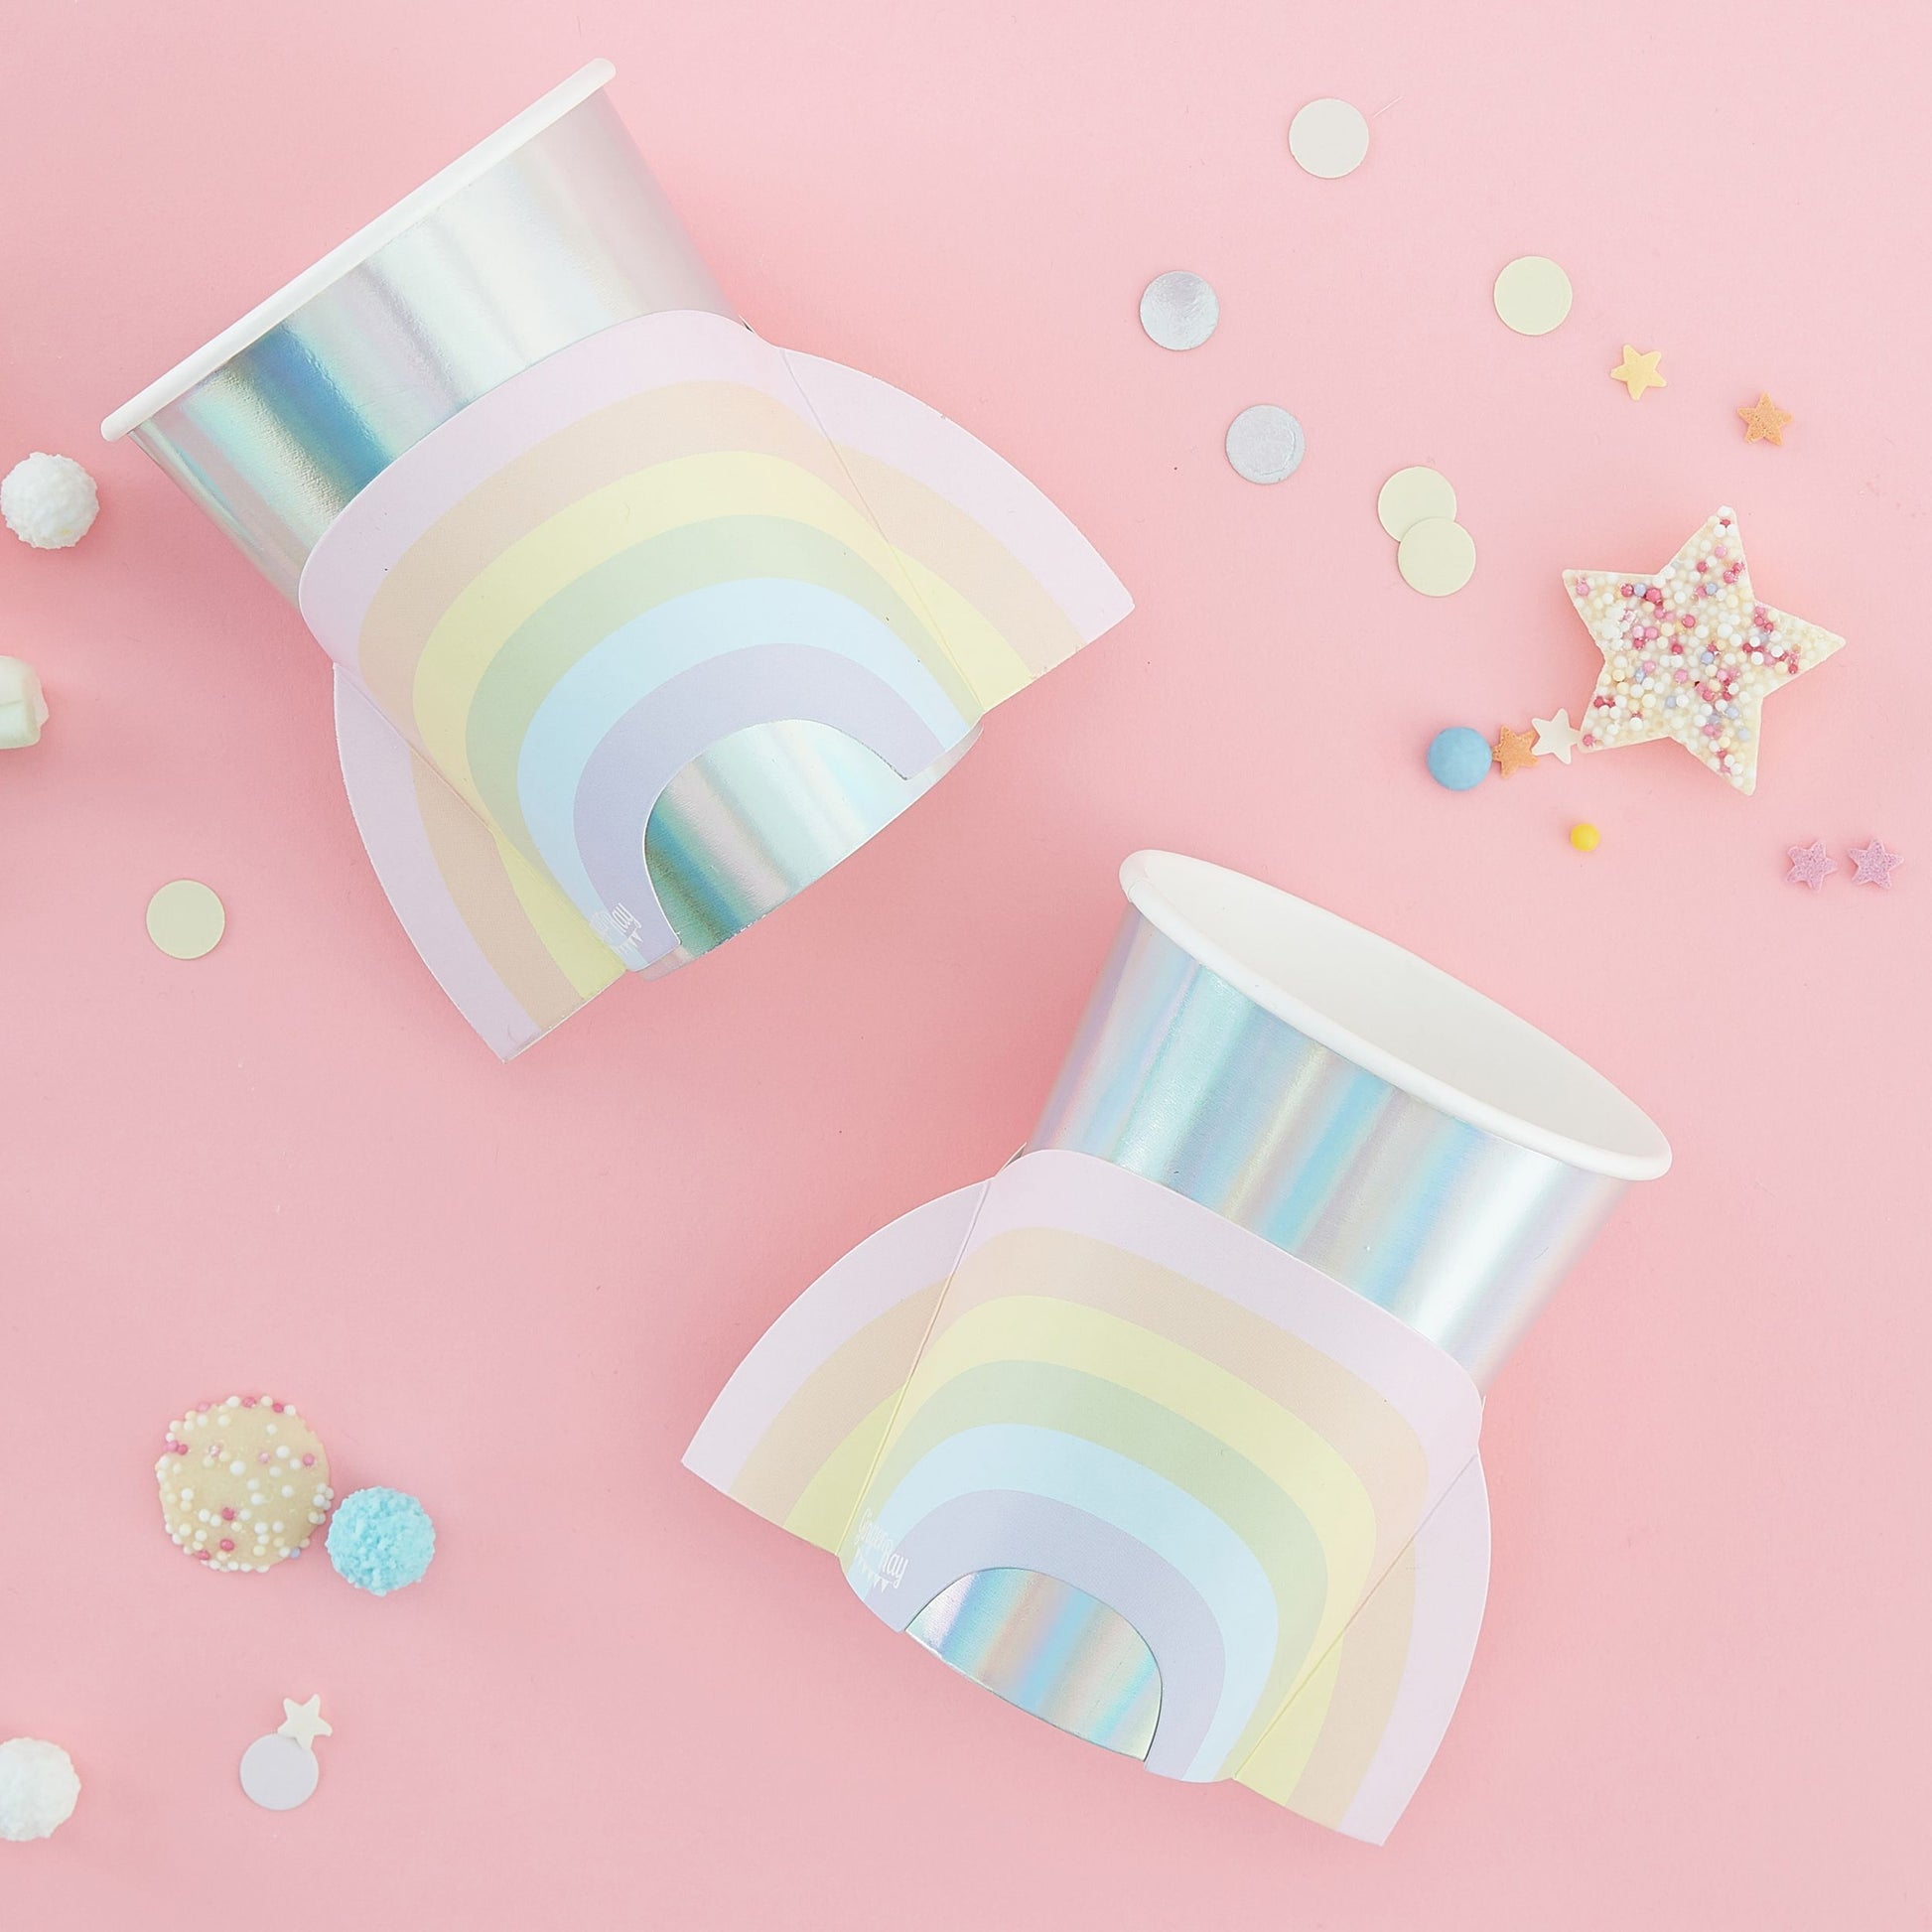 Pastel and Iridescent Paper Rainbow Cups - Muddy Boots Home UK